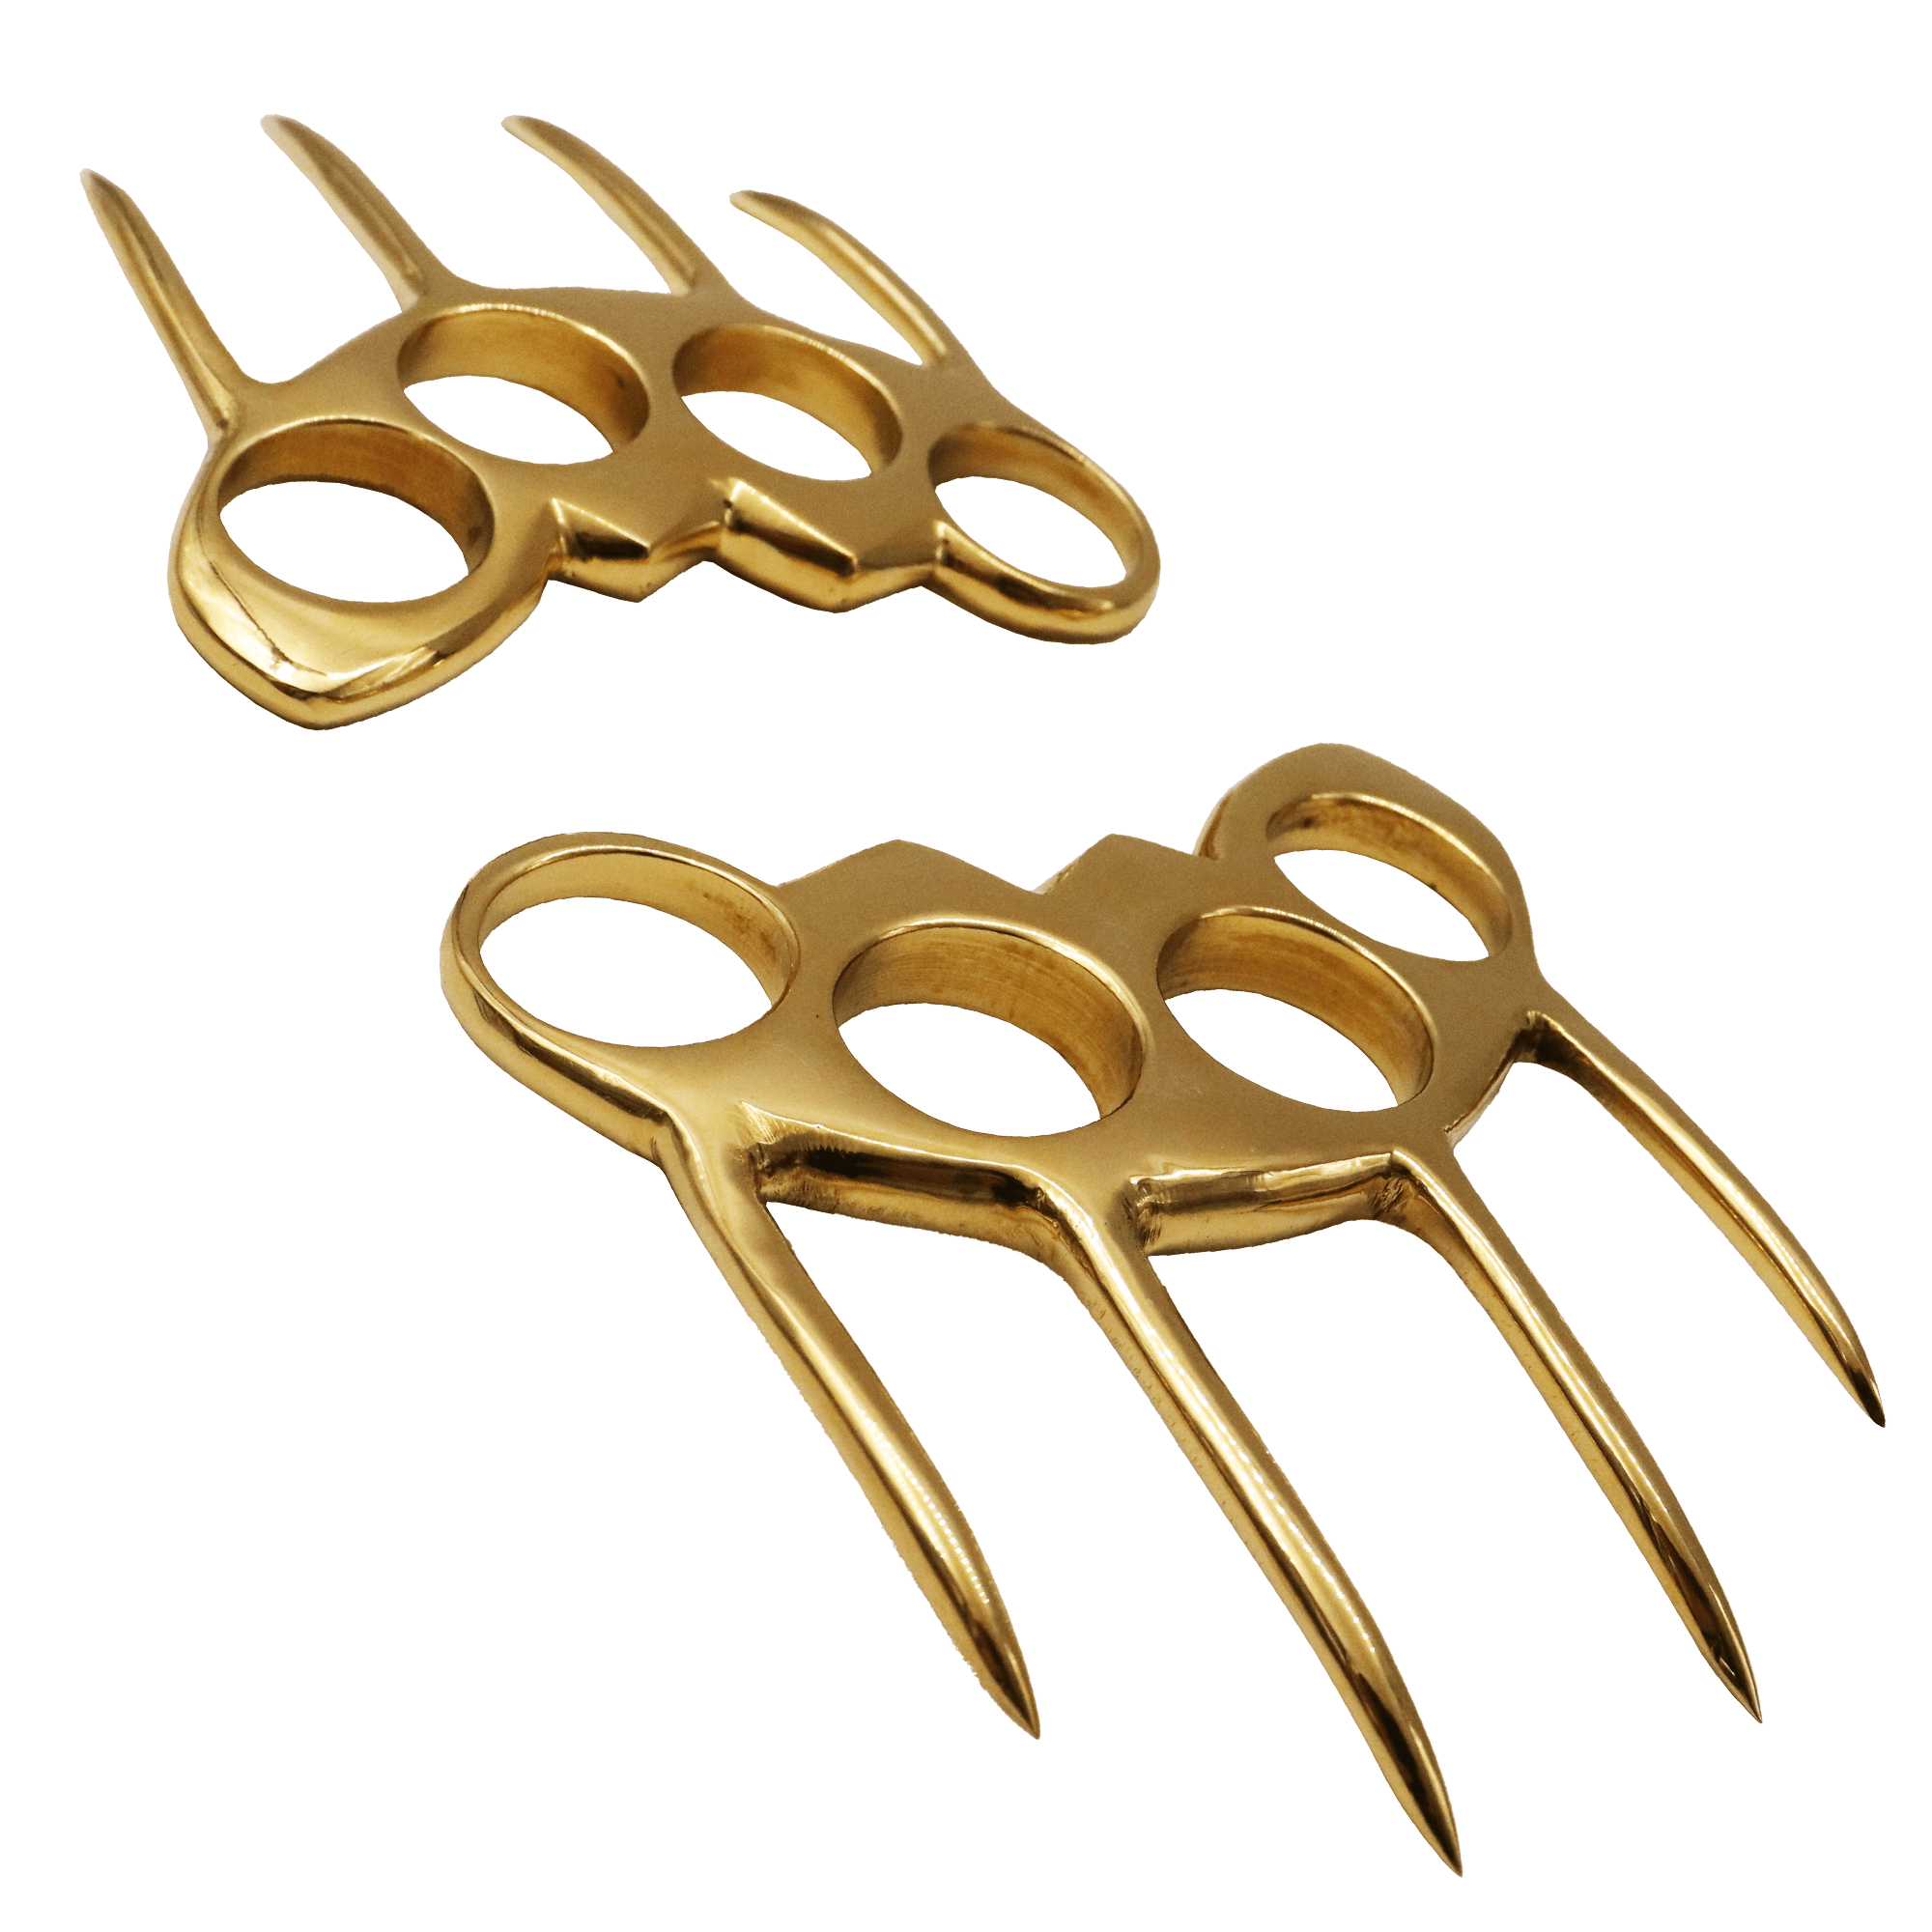 Scorpion Hunter Knuckles - Spiked Knuckle Duster - Scorpion